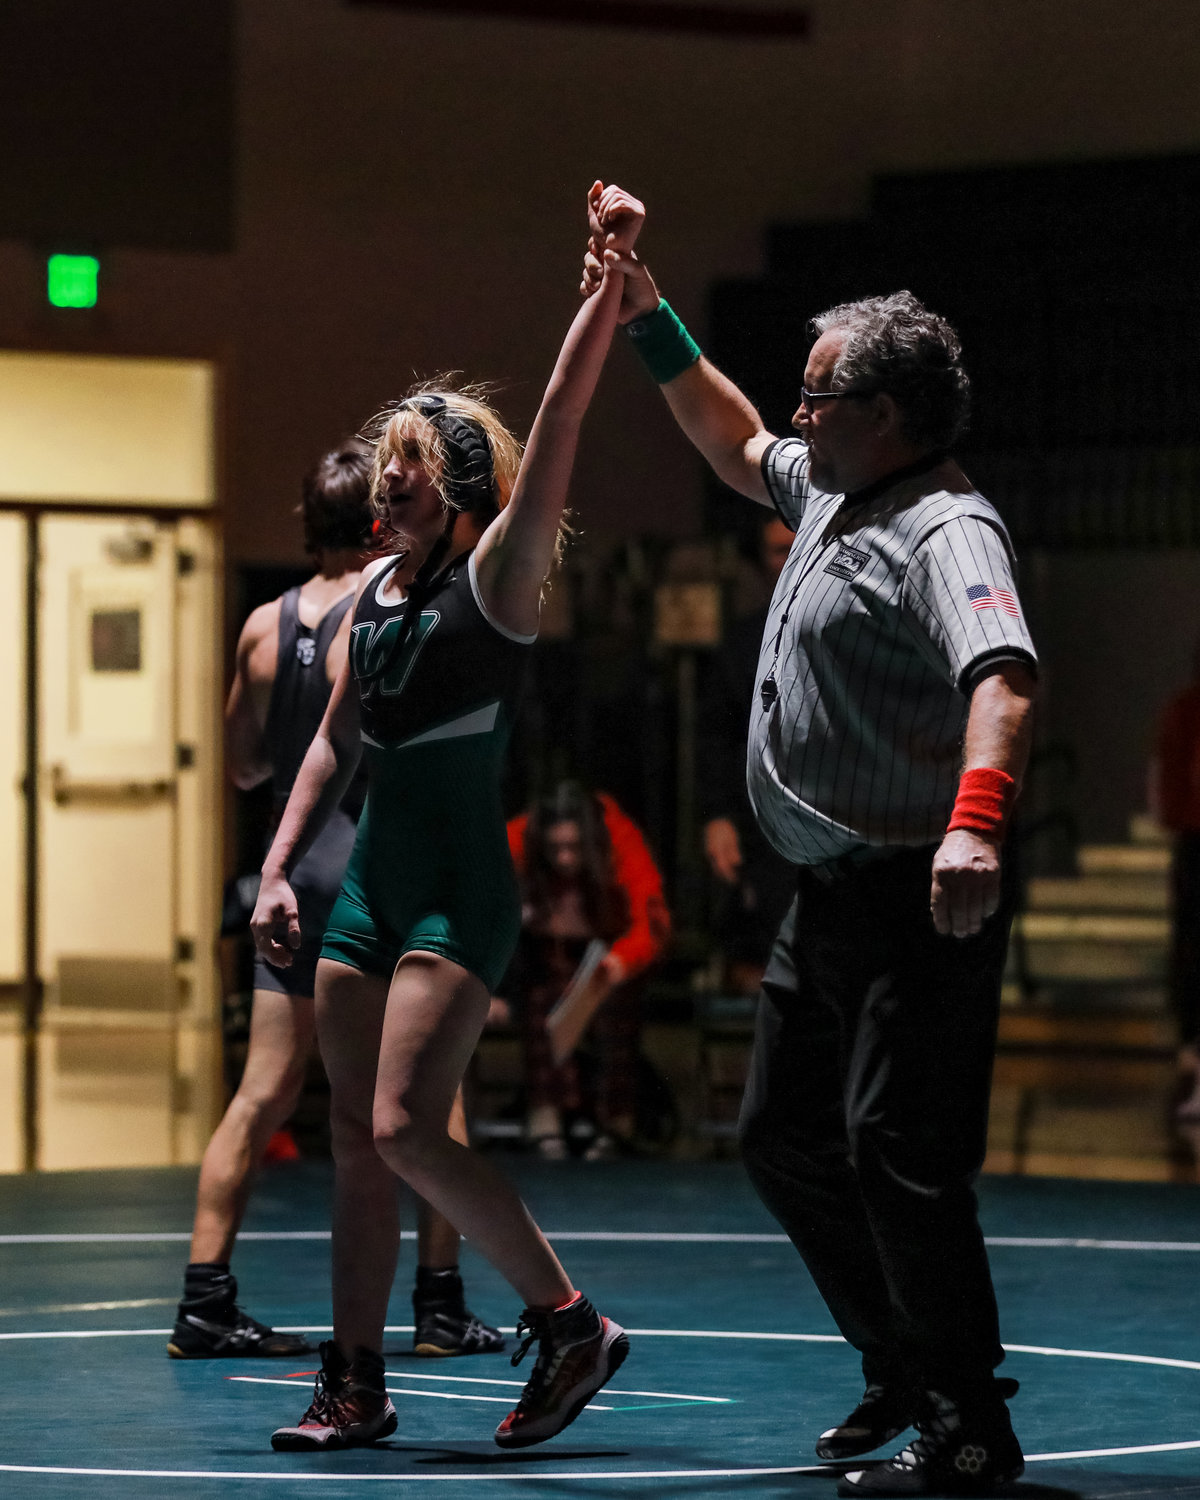 Jersey O’Neill, a sophomore at Woodland High School, secures her second victory of the night in the boys’ 106-pound weight class during a home meet on Wednesday, Jan. 11.